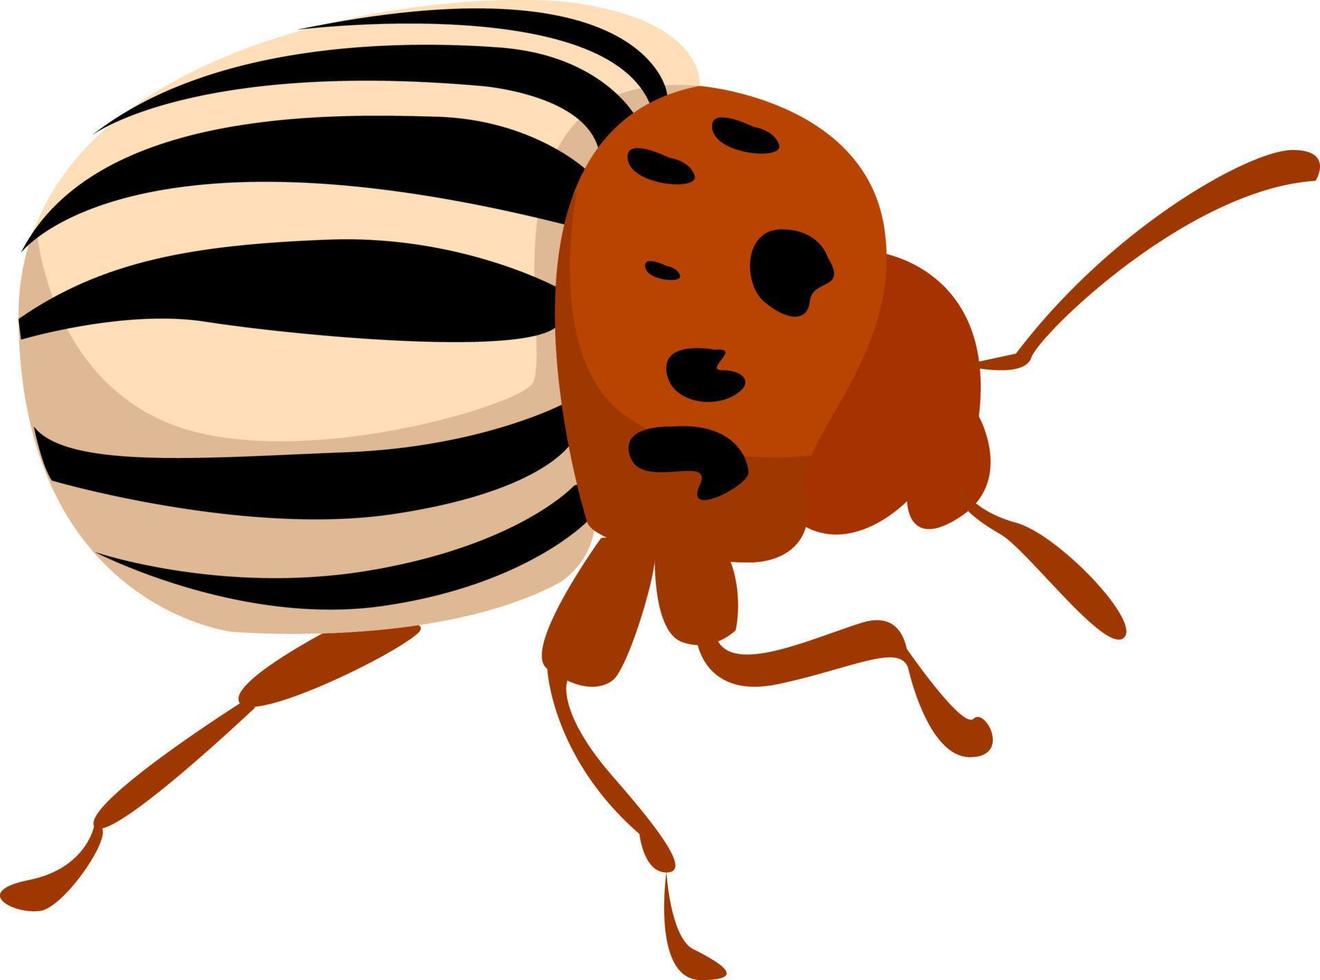 Colorado beetle, illustration, vector on white background.